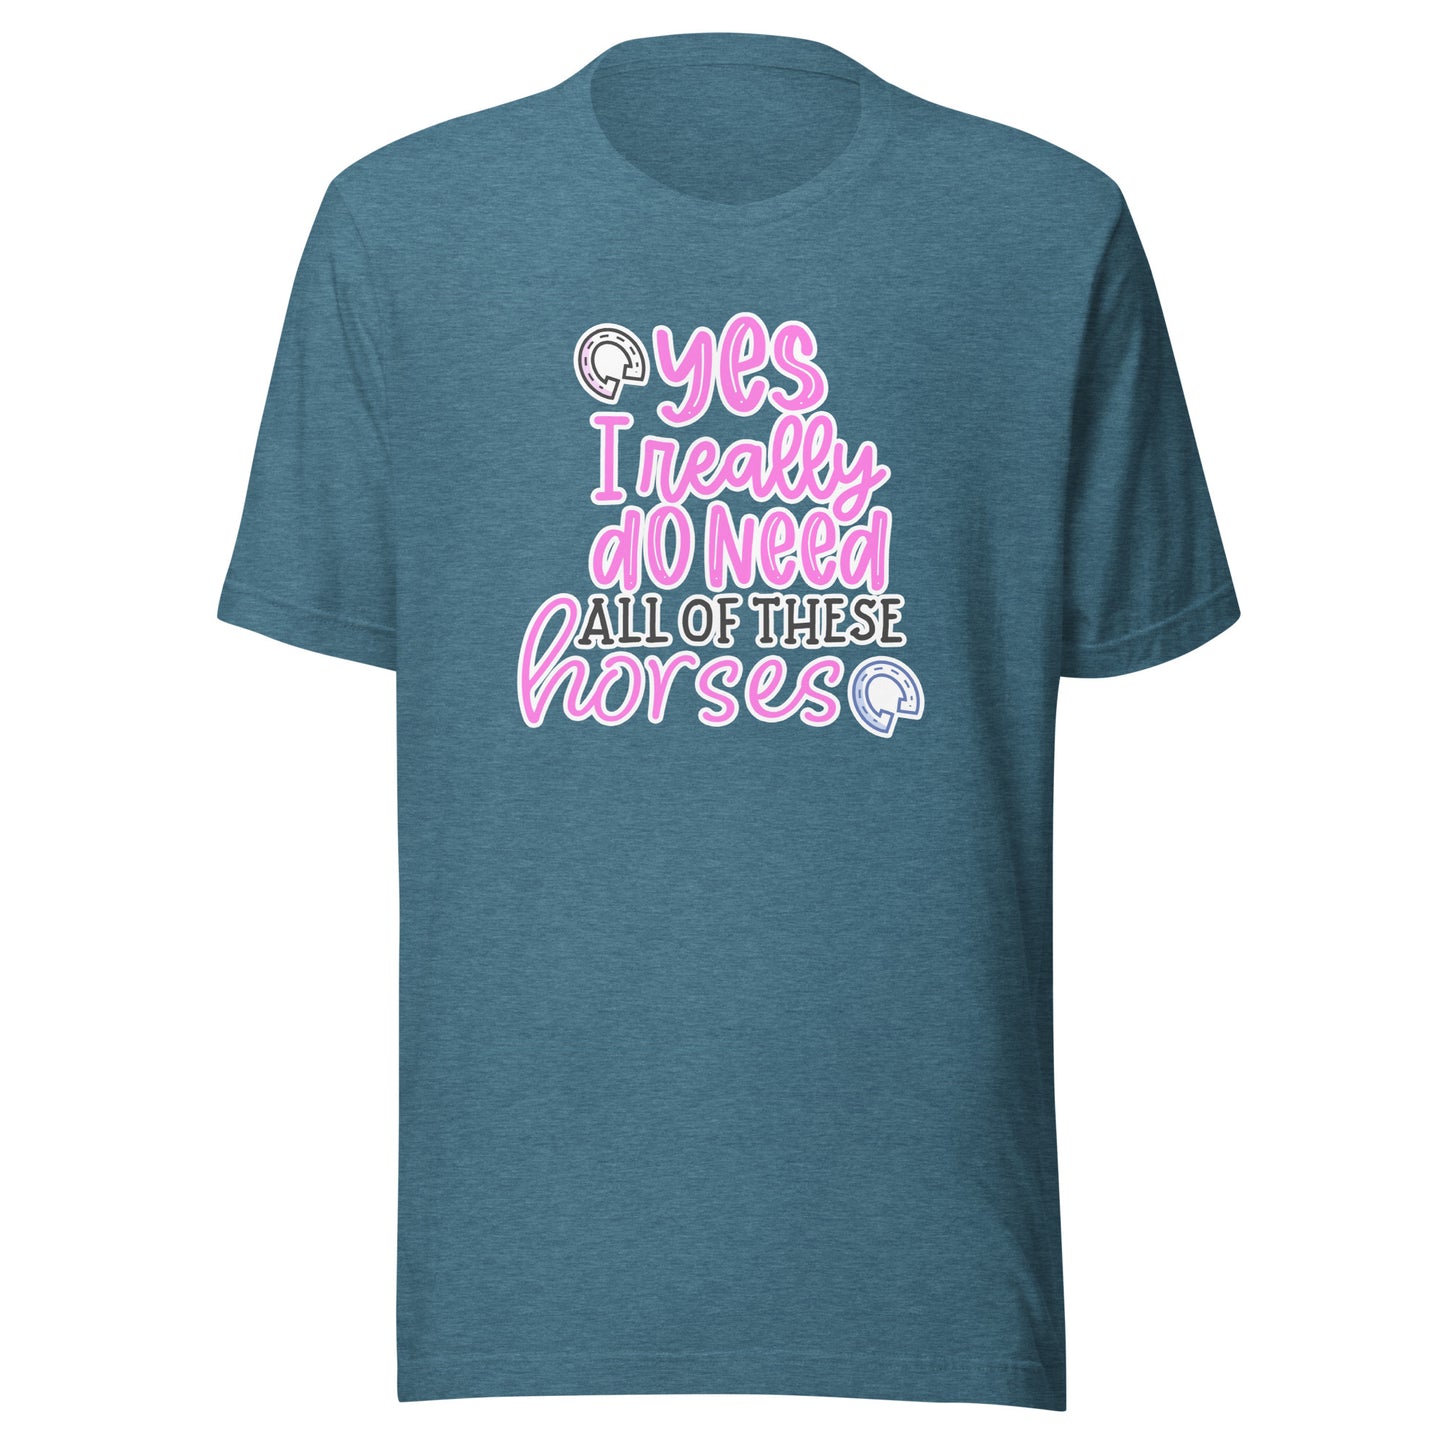 Yes, I Really Do Need All of These Horses T-Shirt